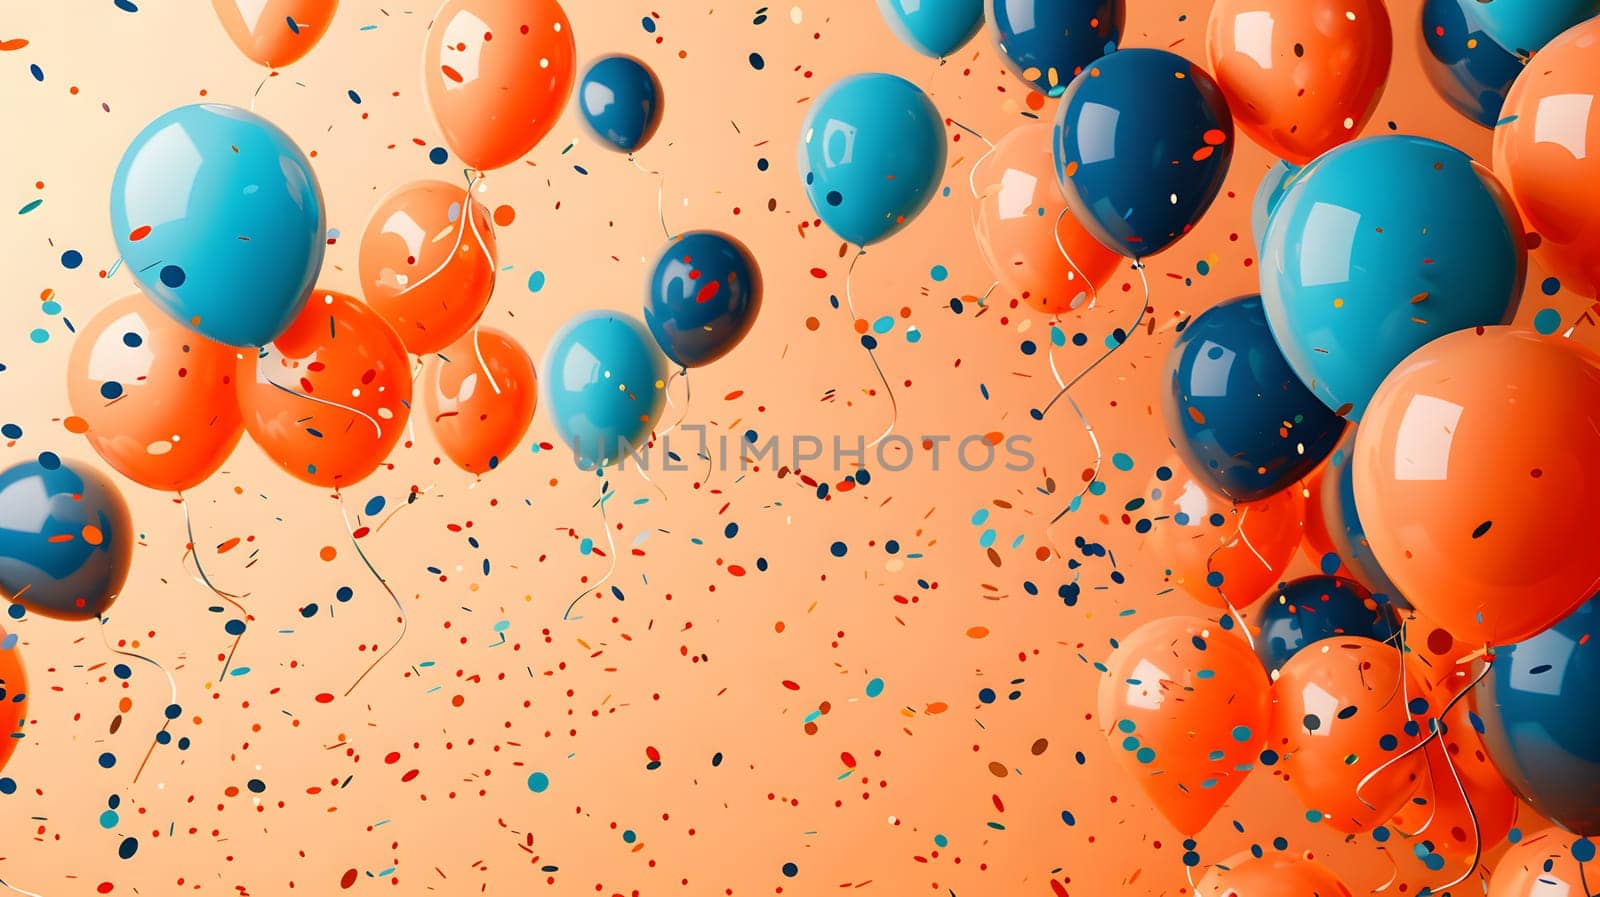 Vibrant orange and azure balloons, along with electric blue confetti, float in the air creating a colorful pattern. A festive organism of colorfulness and recreation in the sky